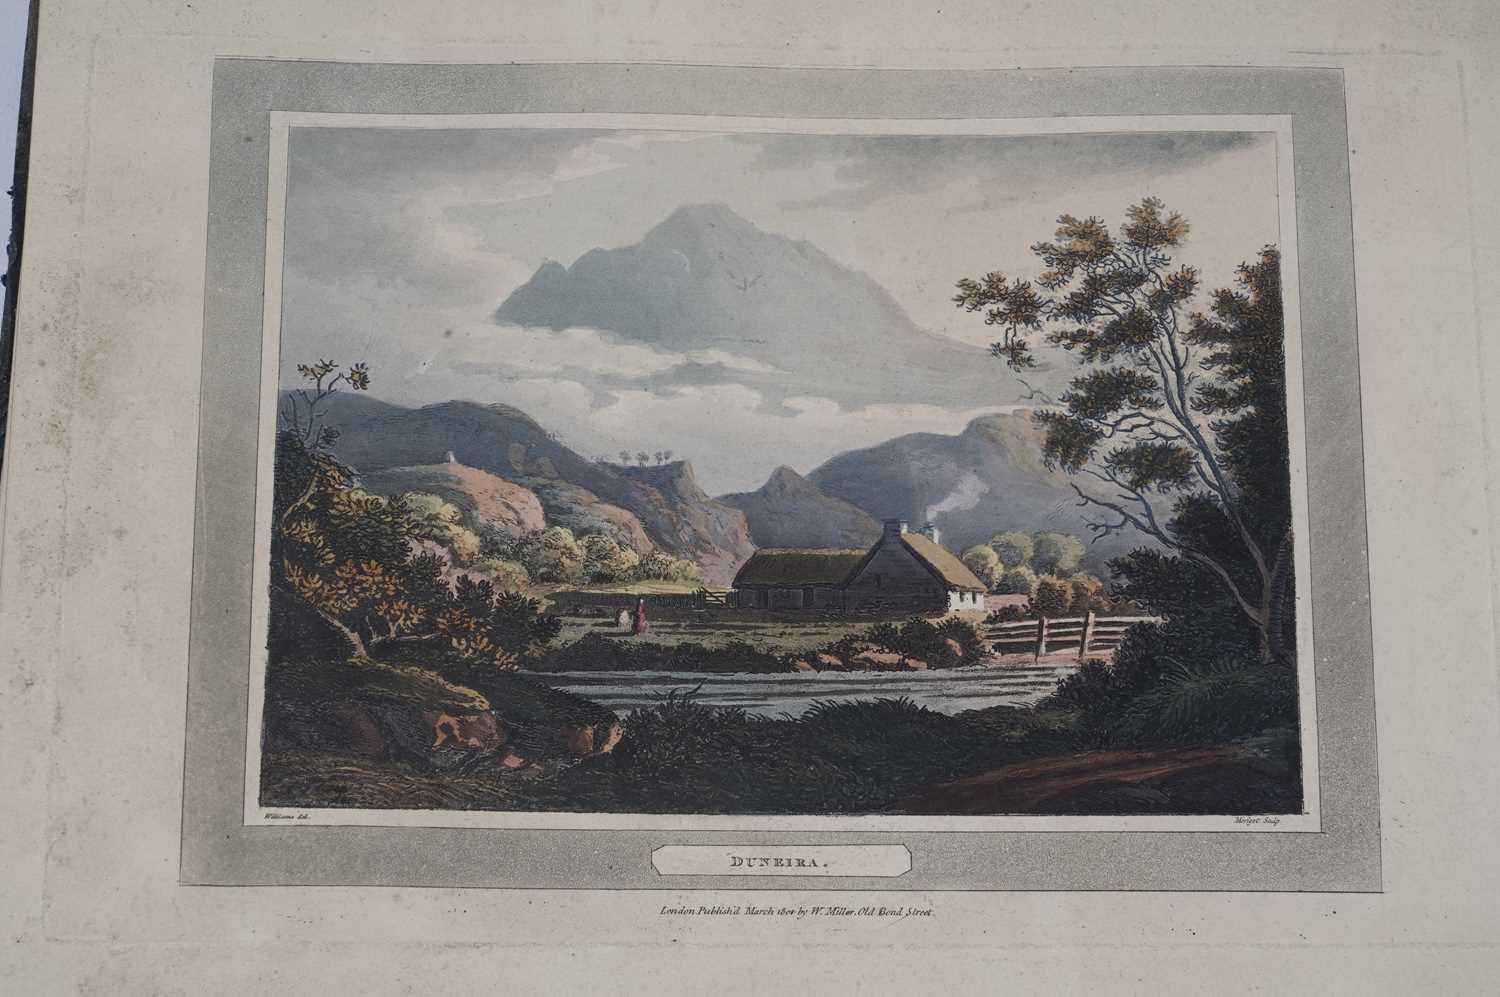 A stereoscopic viewer and an album of Scotland views - Image 16 of 16